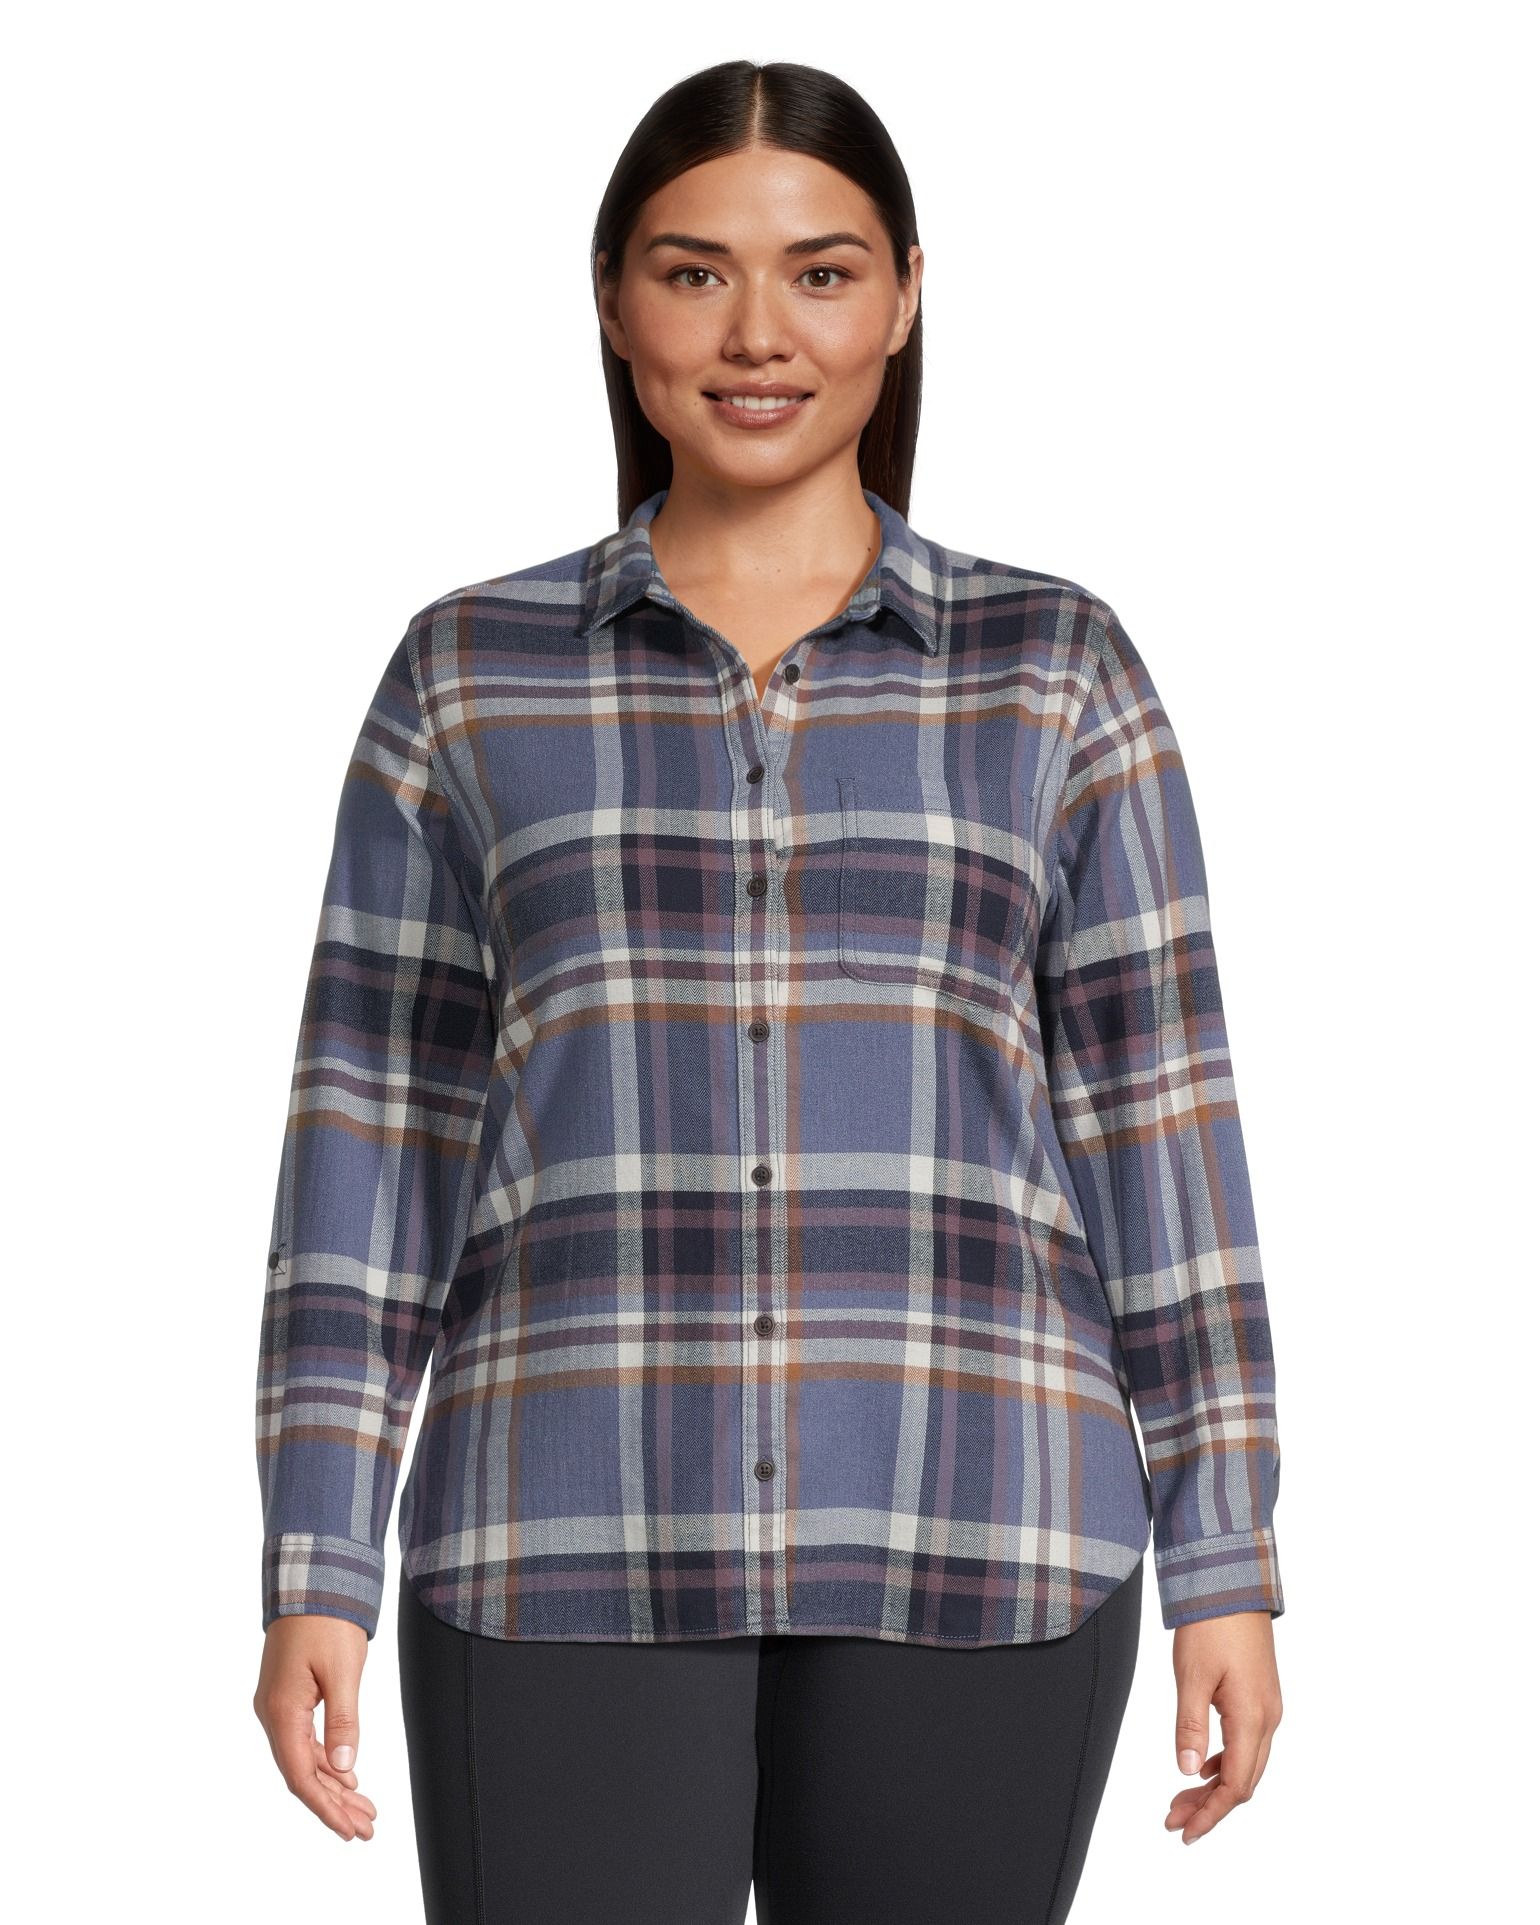 Irevial Womens Plaid Flannel Shirts Casual Long Sleeve Pintucked